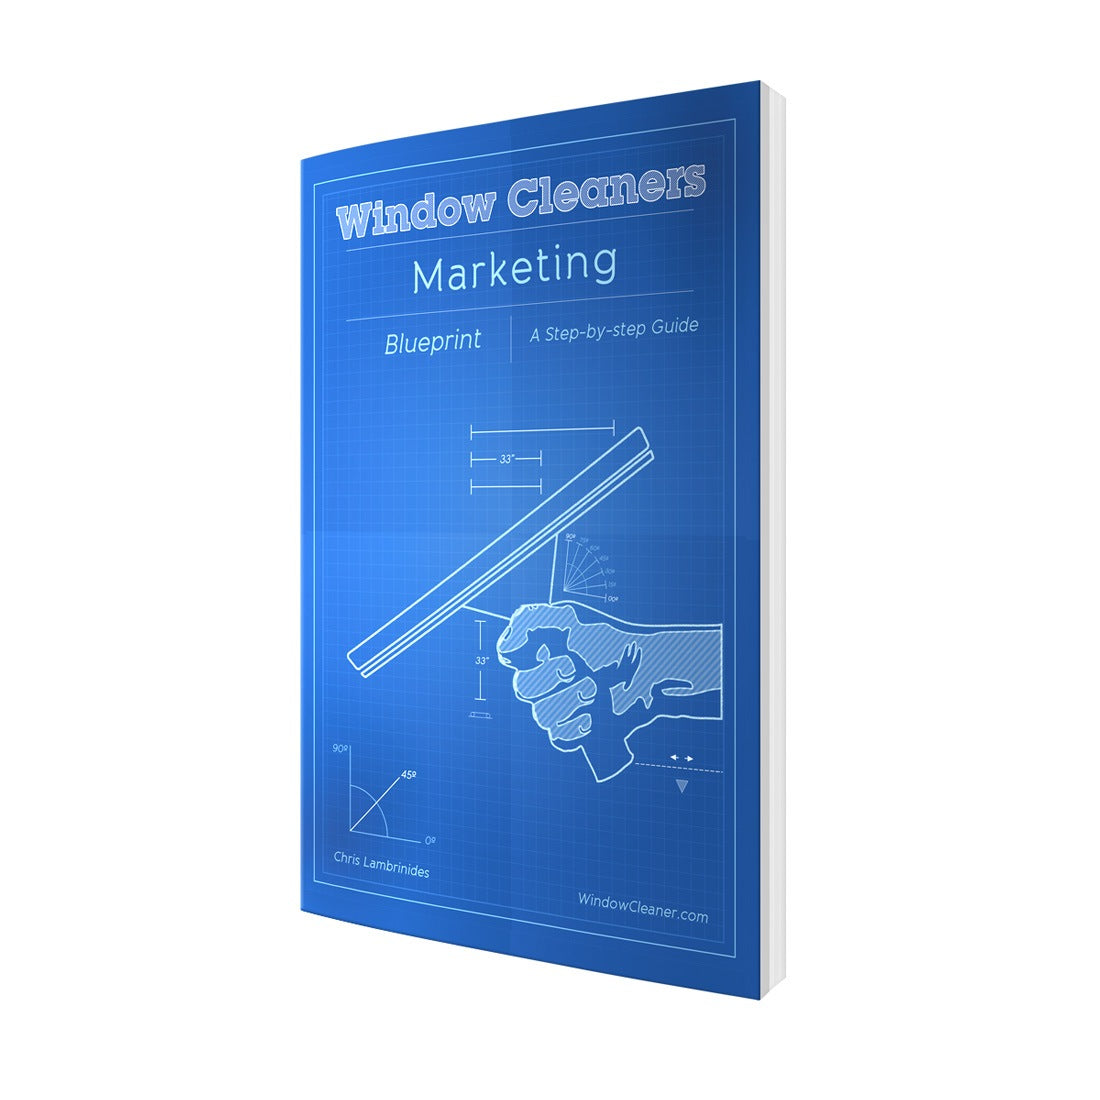 The Window Cleaners Marketing Blueprint